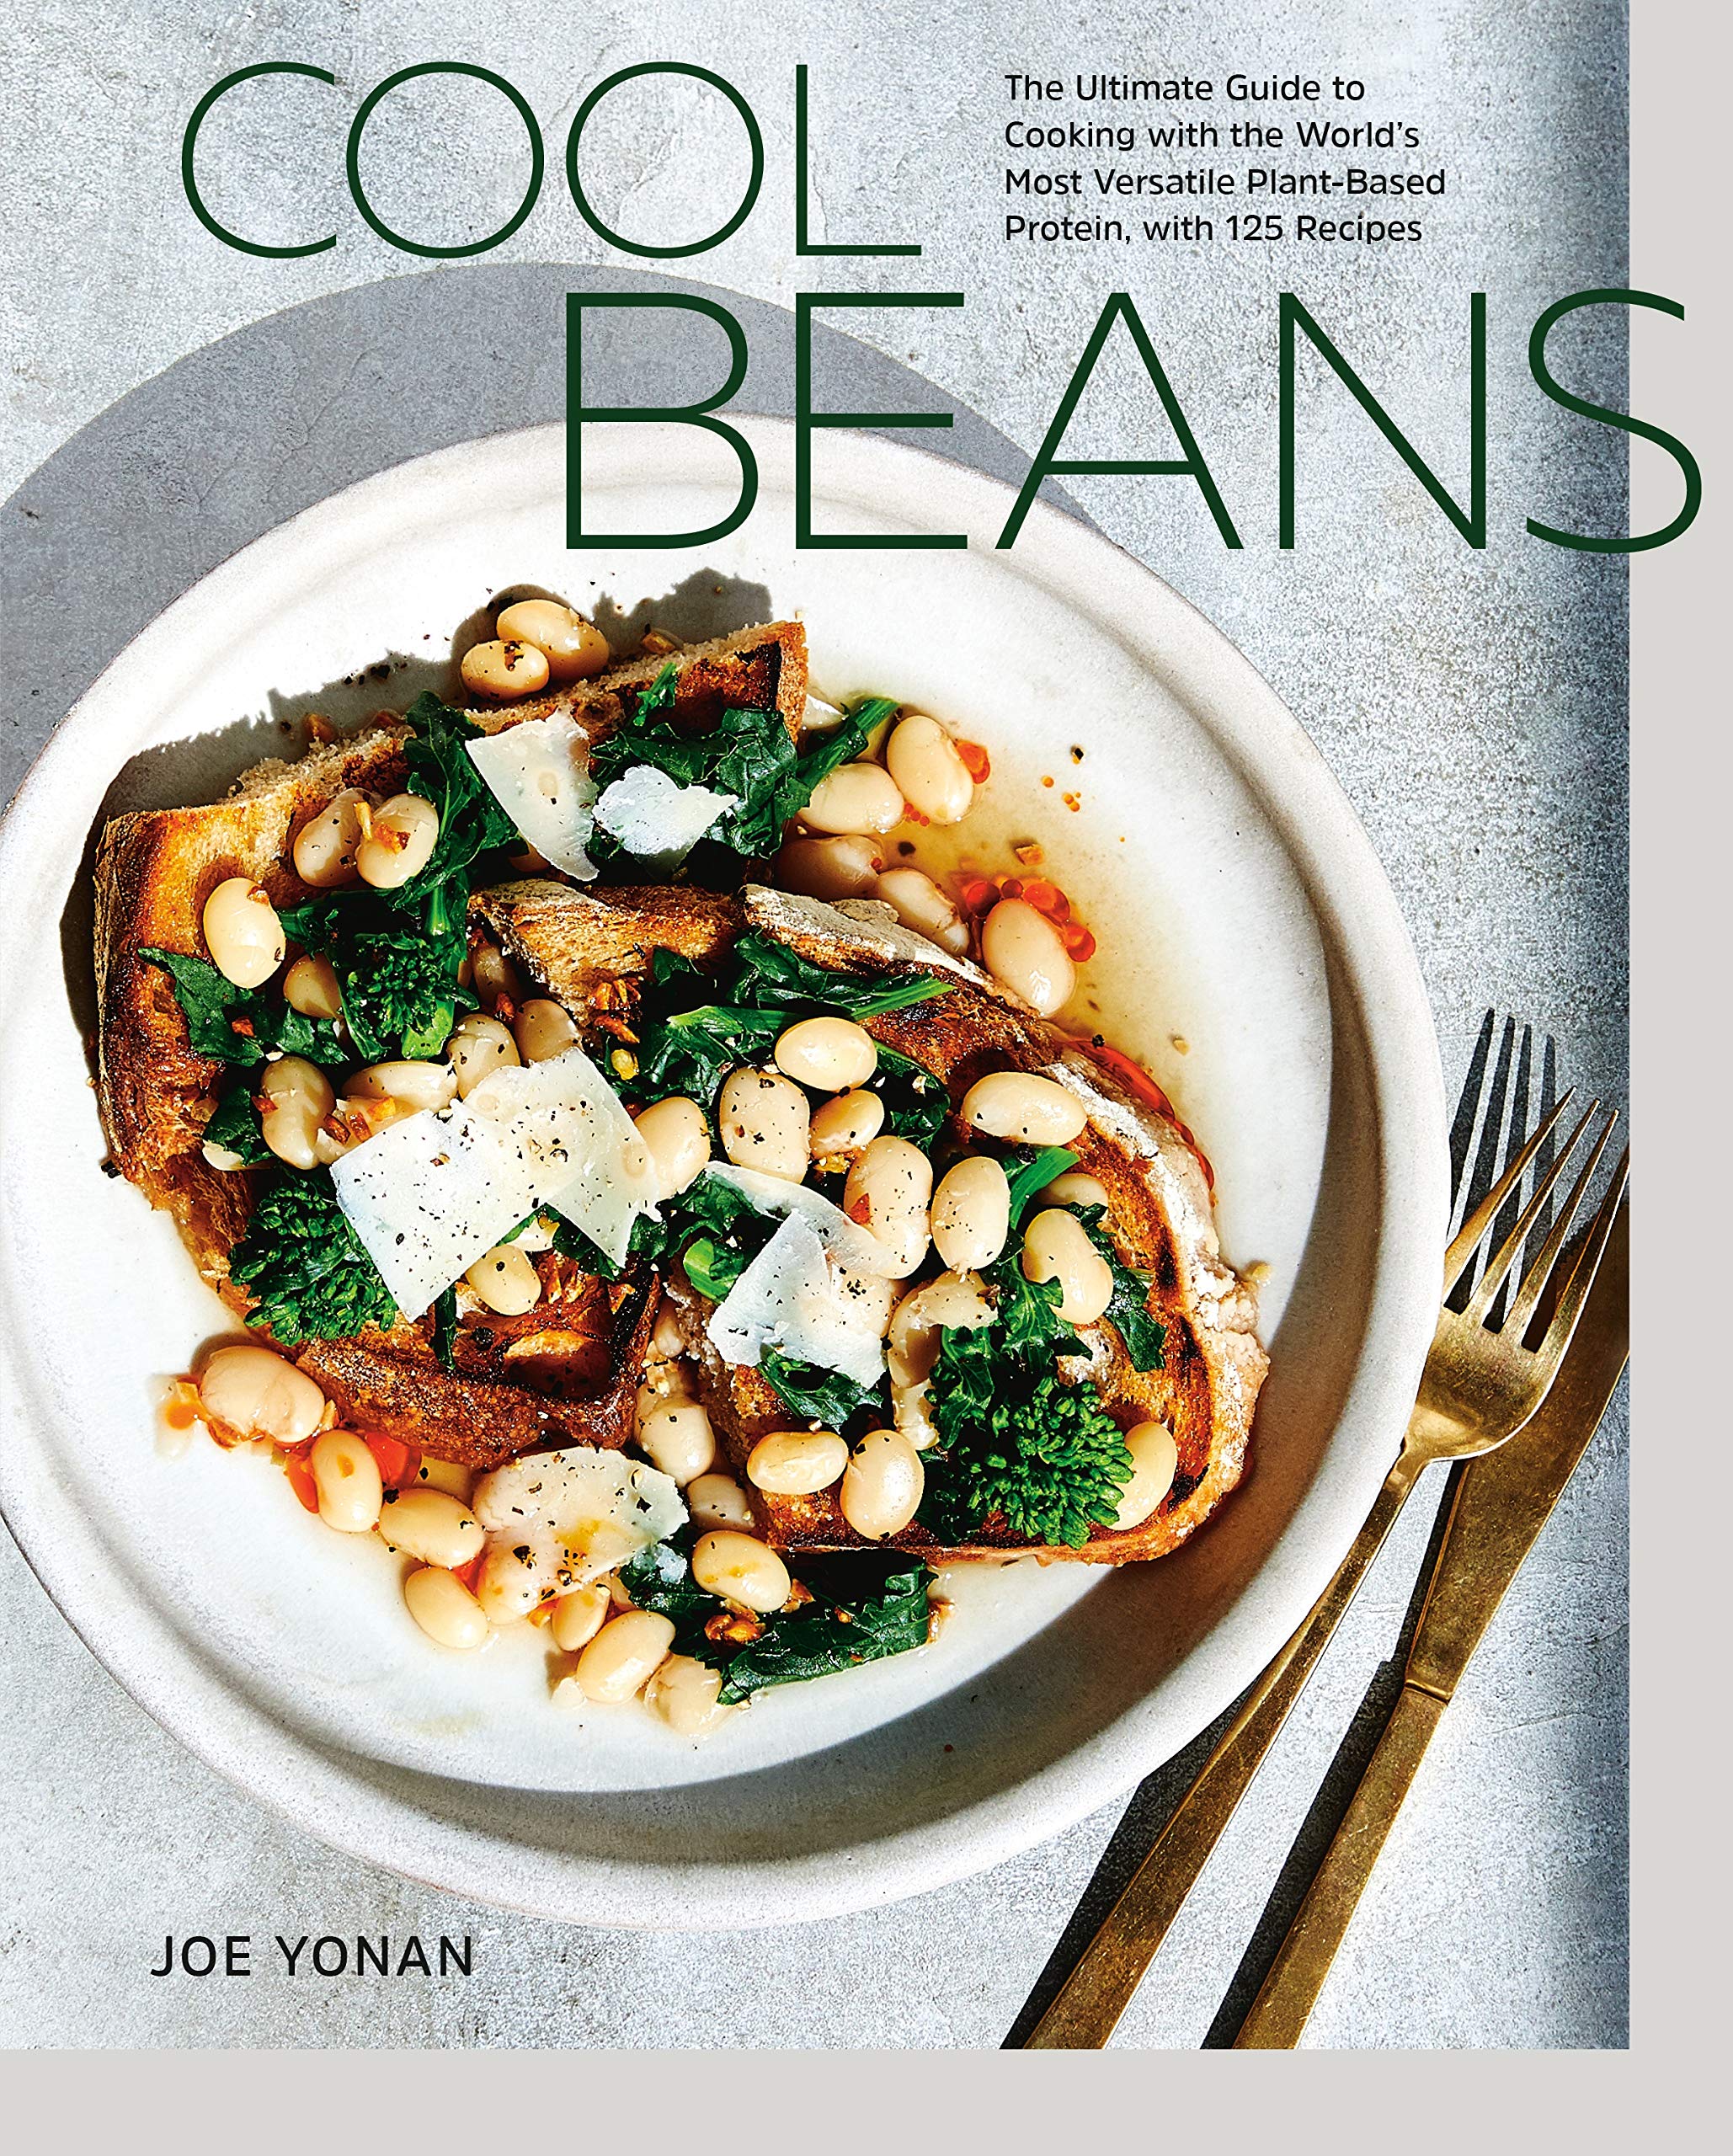 Cool Beans: The Ultimate Guide to Cooking with the World's Most Versatile Plant-Based Protein, with 125 Recipes (Joe Yonan)